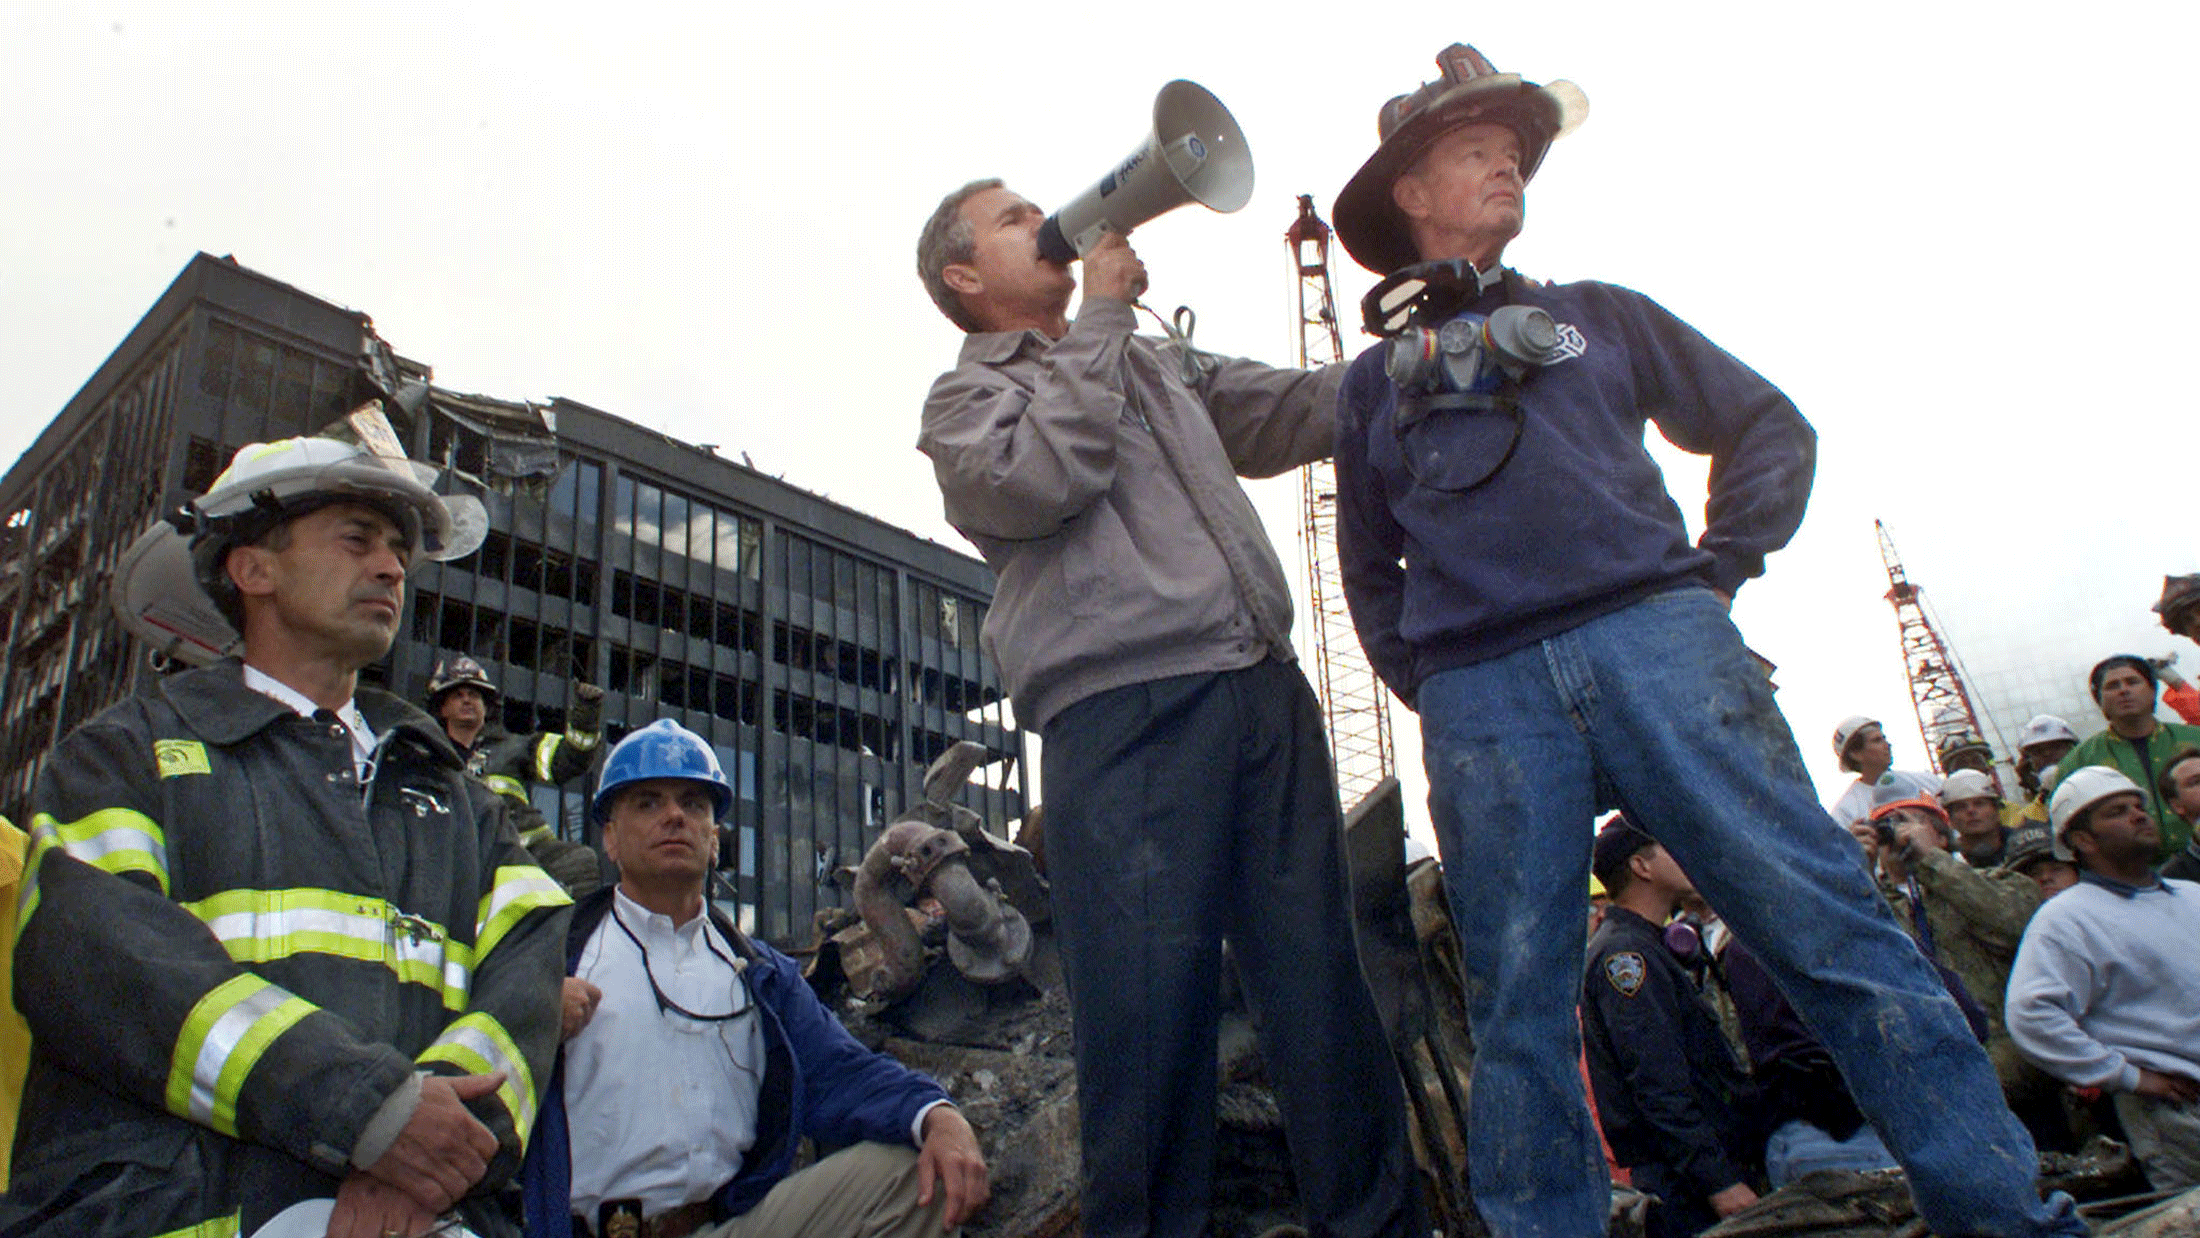 George W. Bush is shown with retired firefighter Bob Beckwith (R) at the scene of the World Trade Center disaster on September 14, 2001